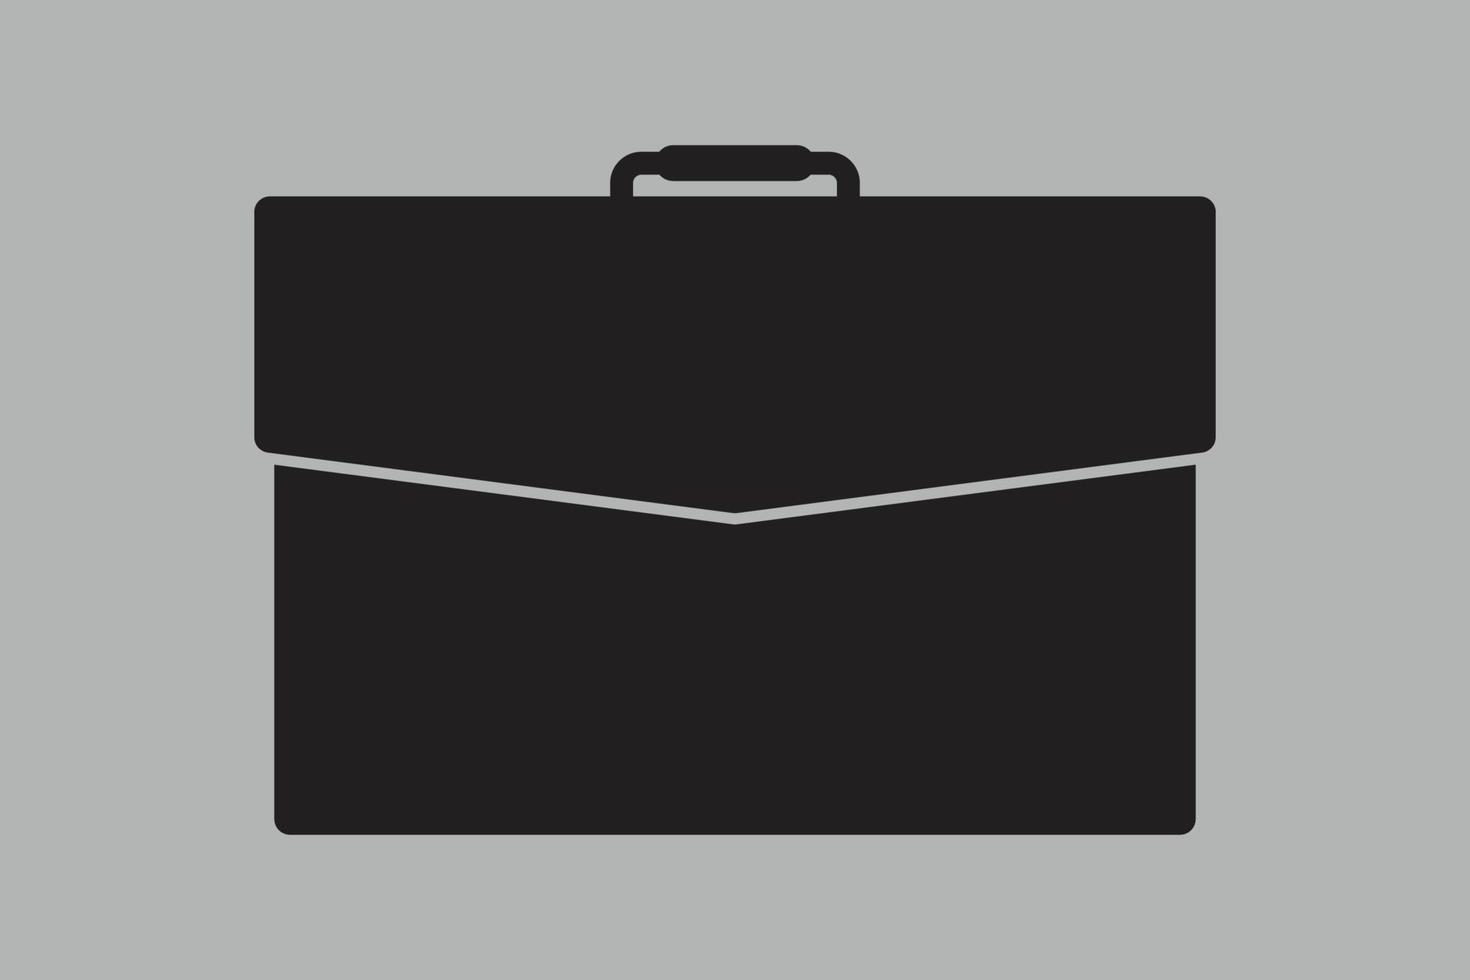 Briefcase icon. Business man bag sign vector illustration.